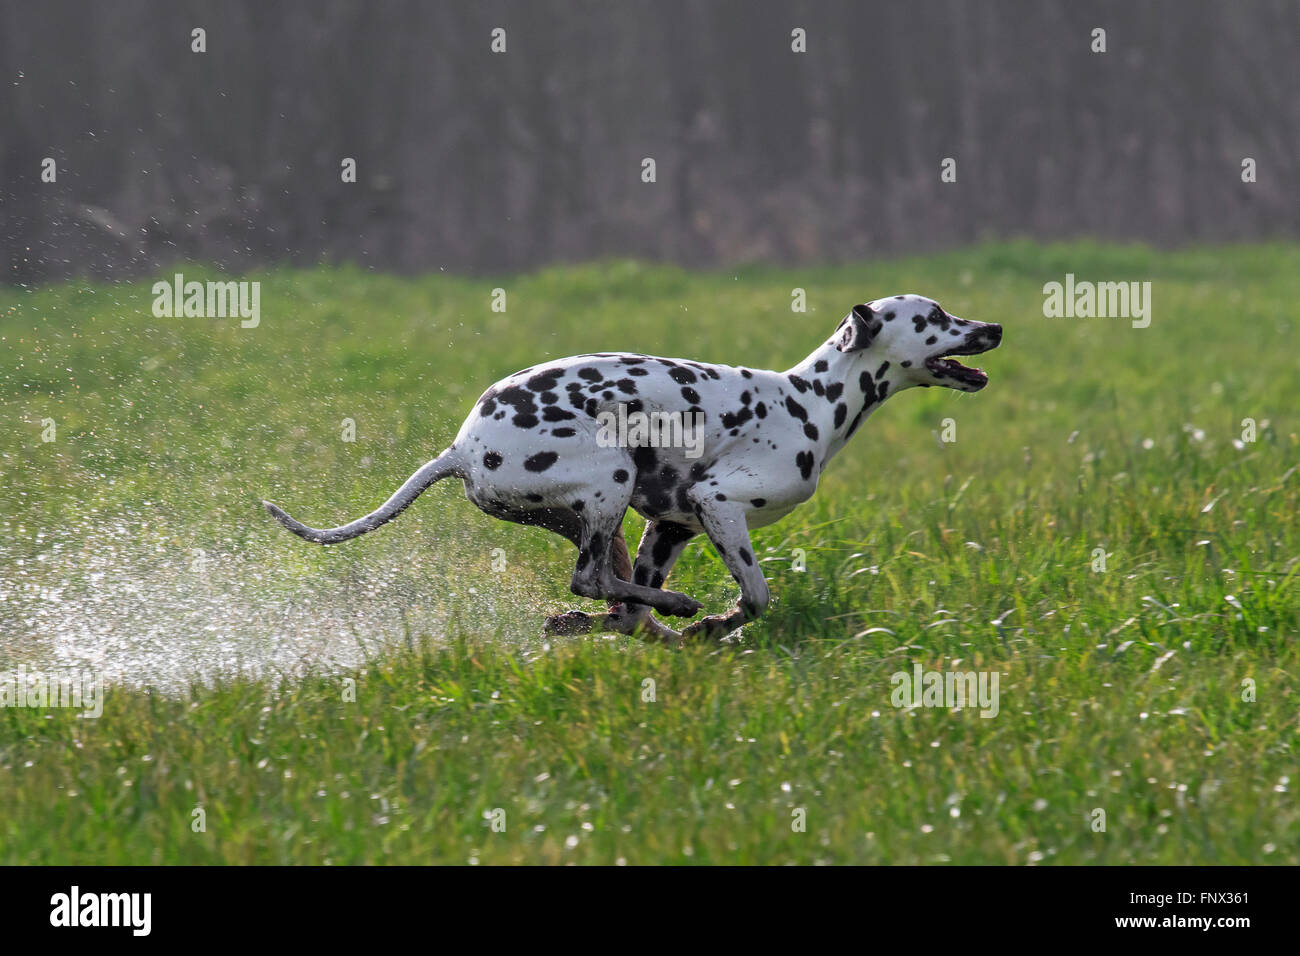 Dalmatian / carriage dog / spotted coach dog running through wet grass in field Stock Photo